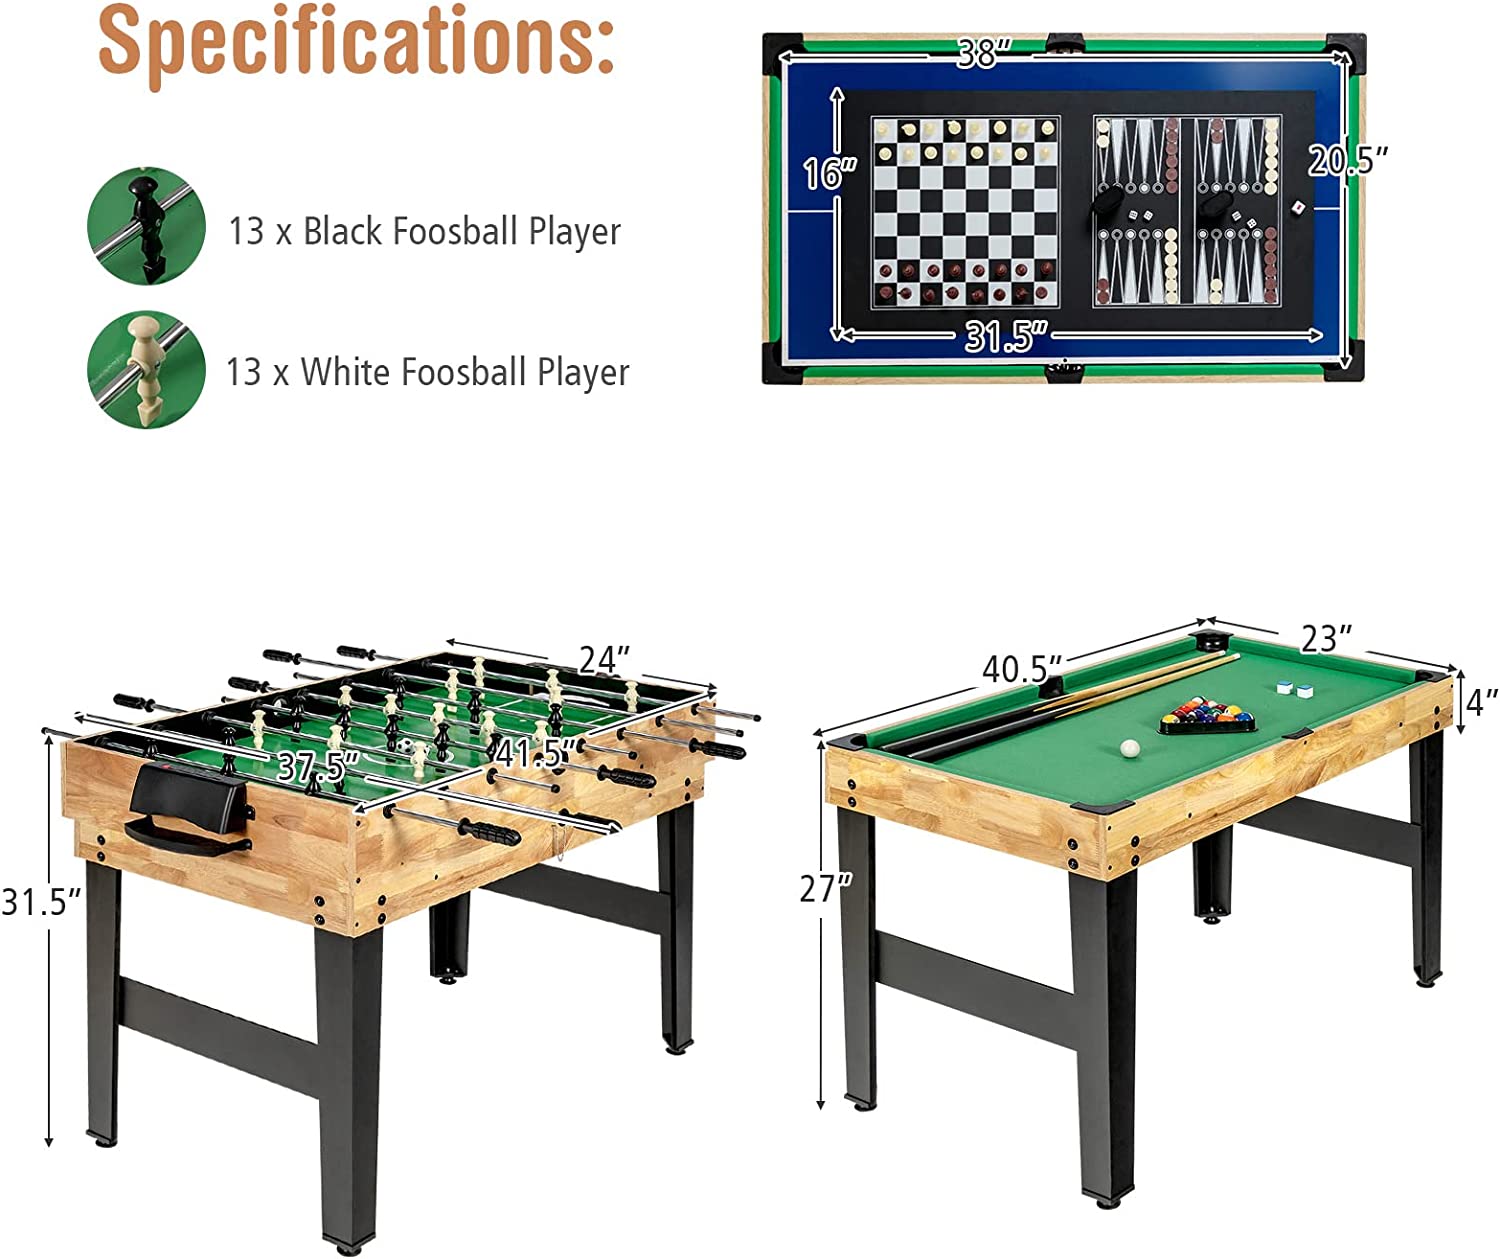 Sunnydaze Multi-Game Table with Billiards, Hockey, Foosball, Ping Pong,  Shuffleboard, Chess, Cards, Checkers, Bowling, and Backgammon - Game Time  Blue 